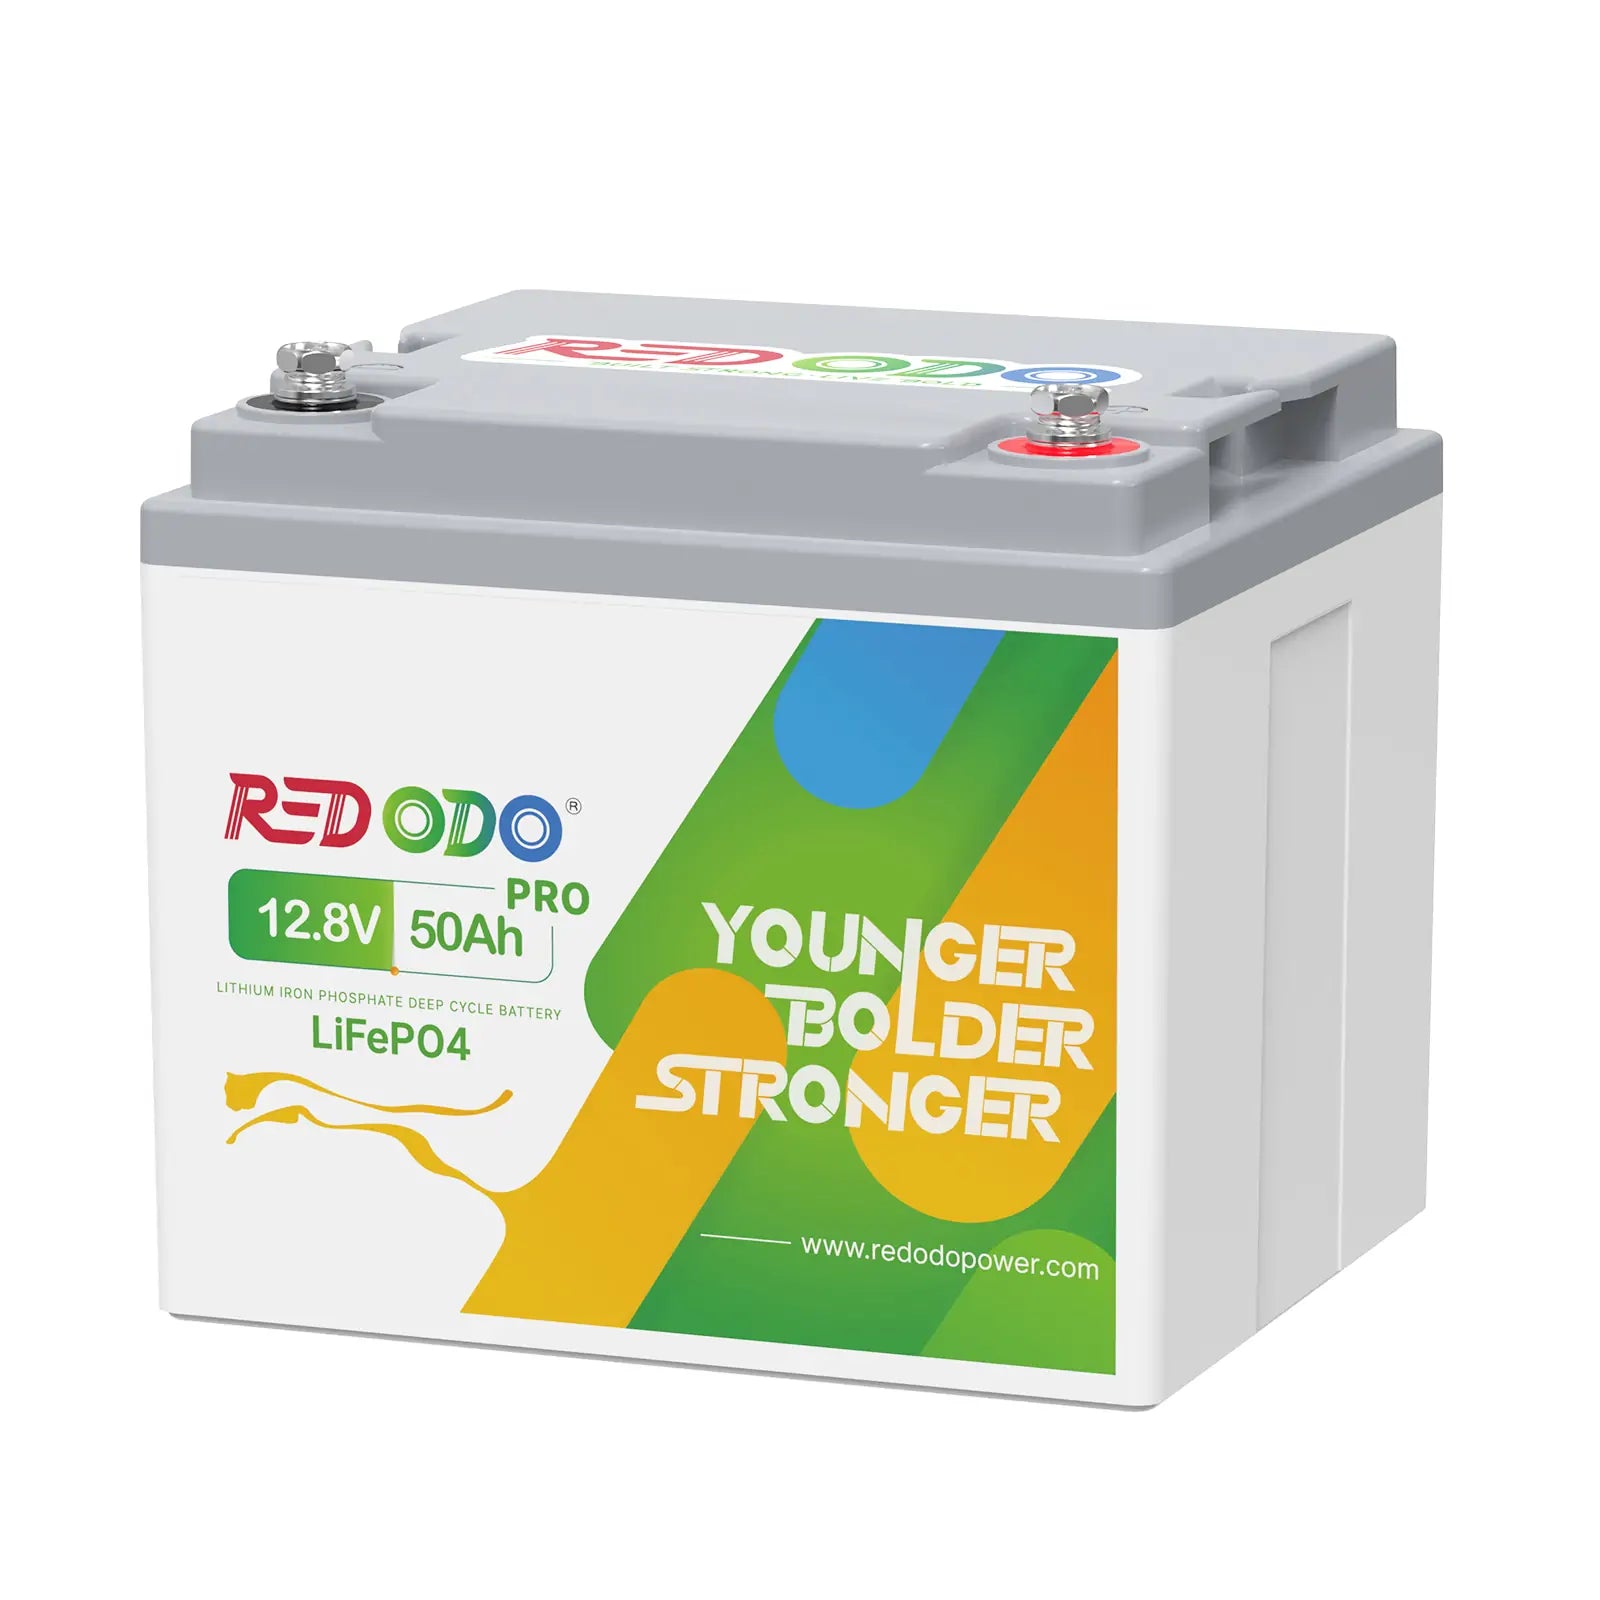 【As low as $166】Redodo 12V 50Ah Pro LiFePO4 Battery | 640Wh & 640W